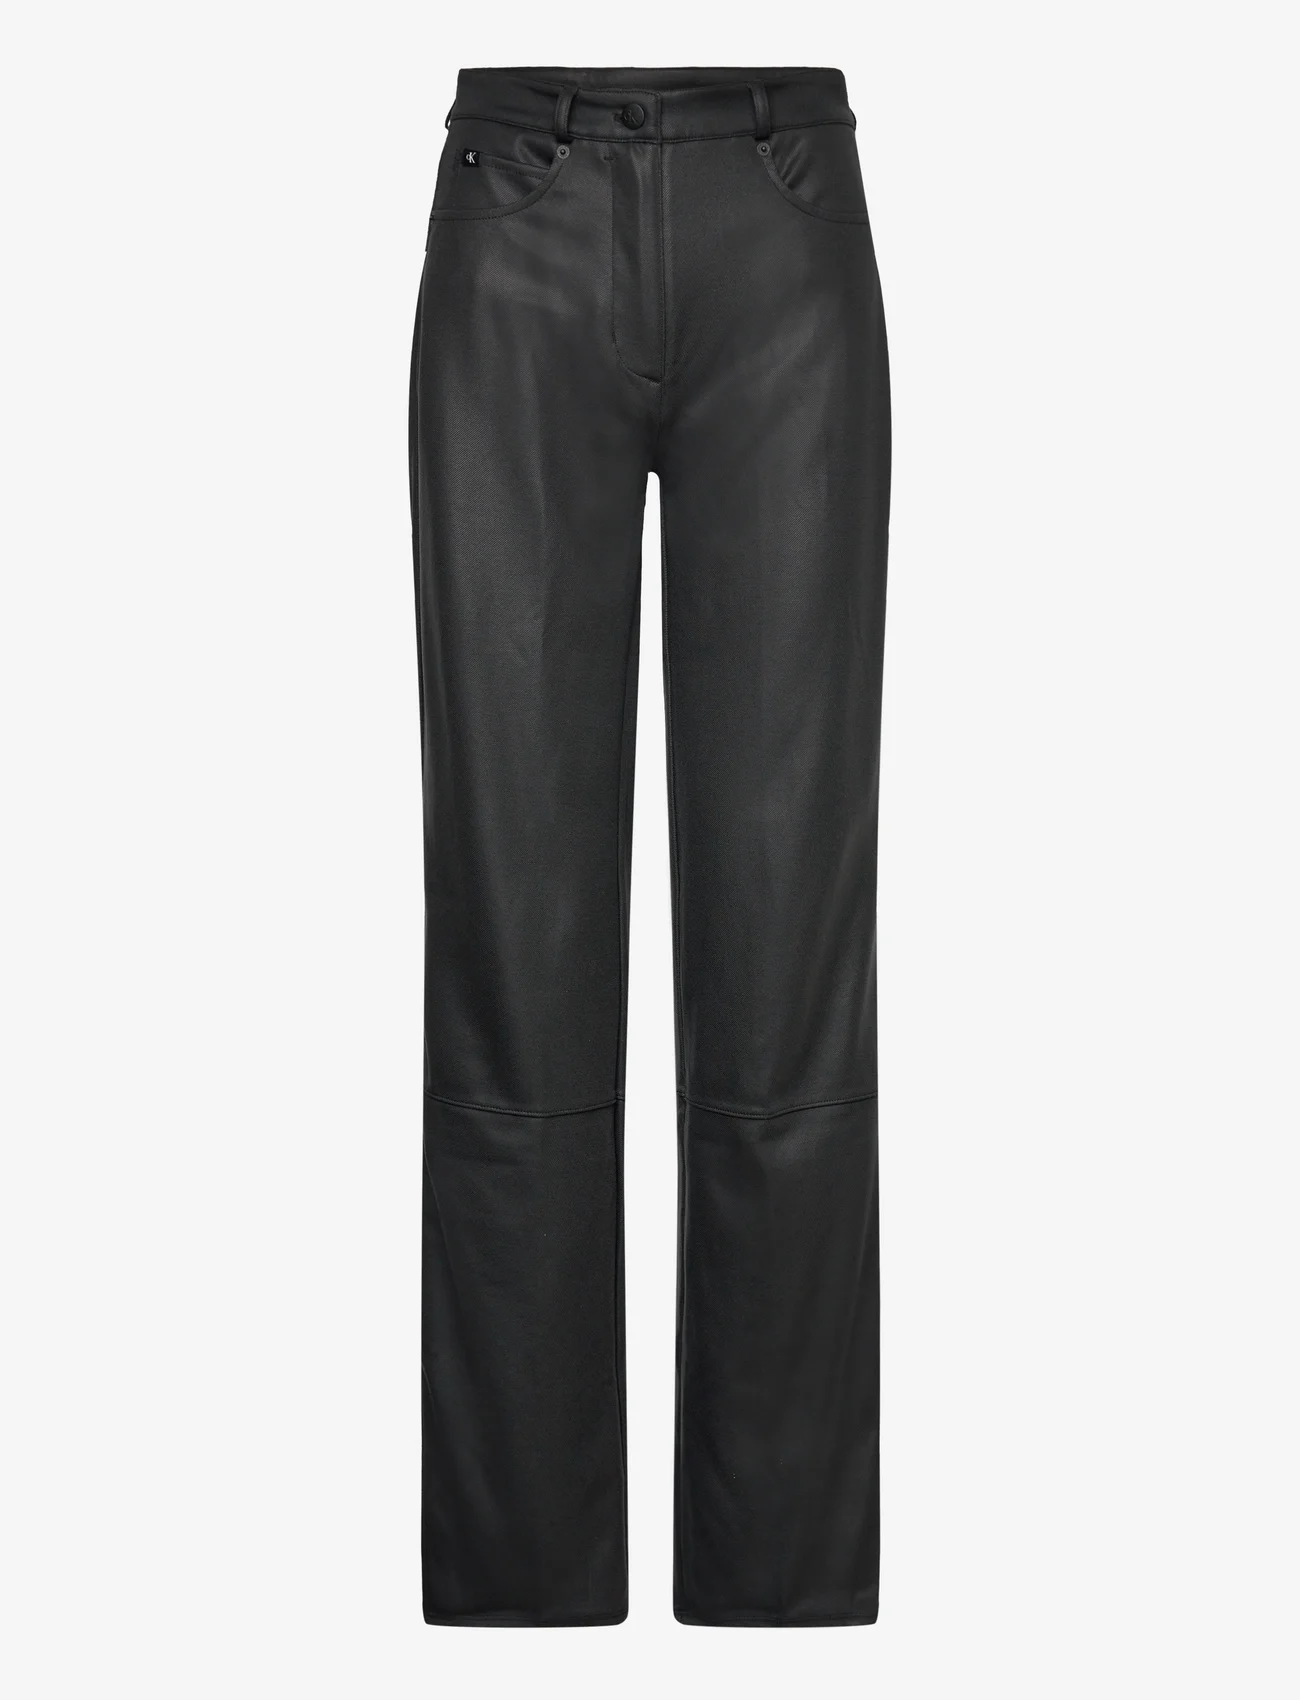 Calvin Klein Jeans - COATED MILANO HR STRAIGHT - leather trousers - ck black - 0